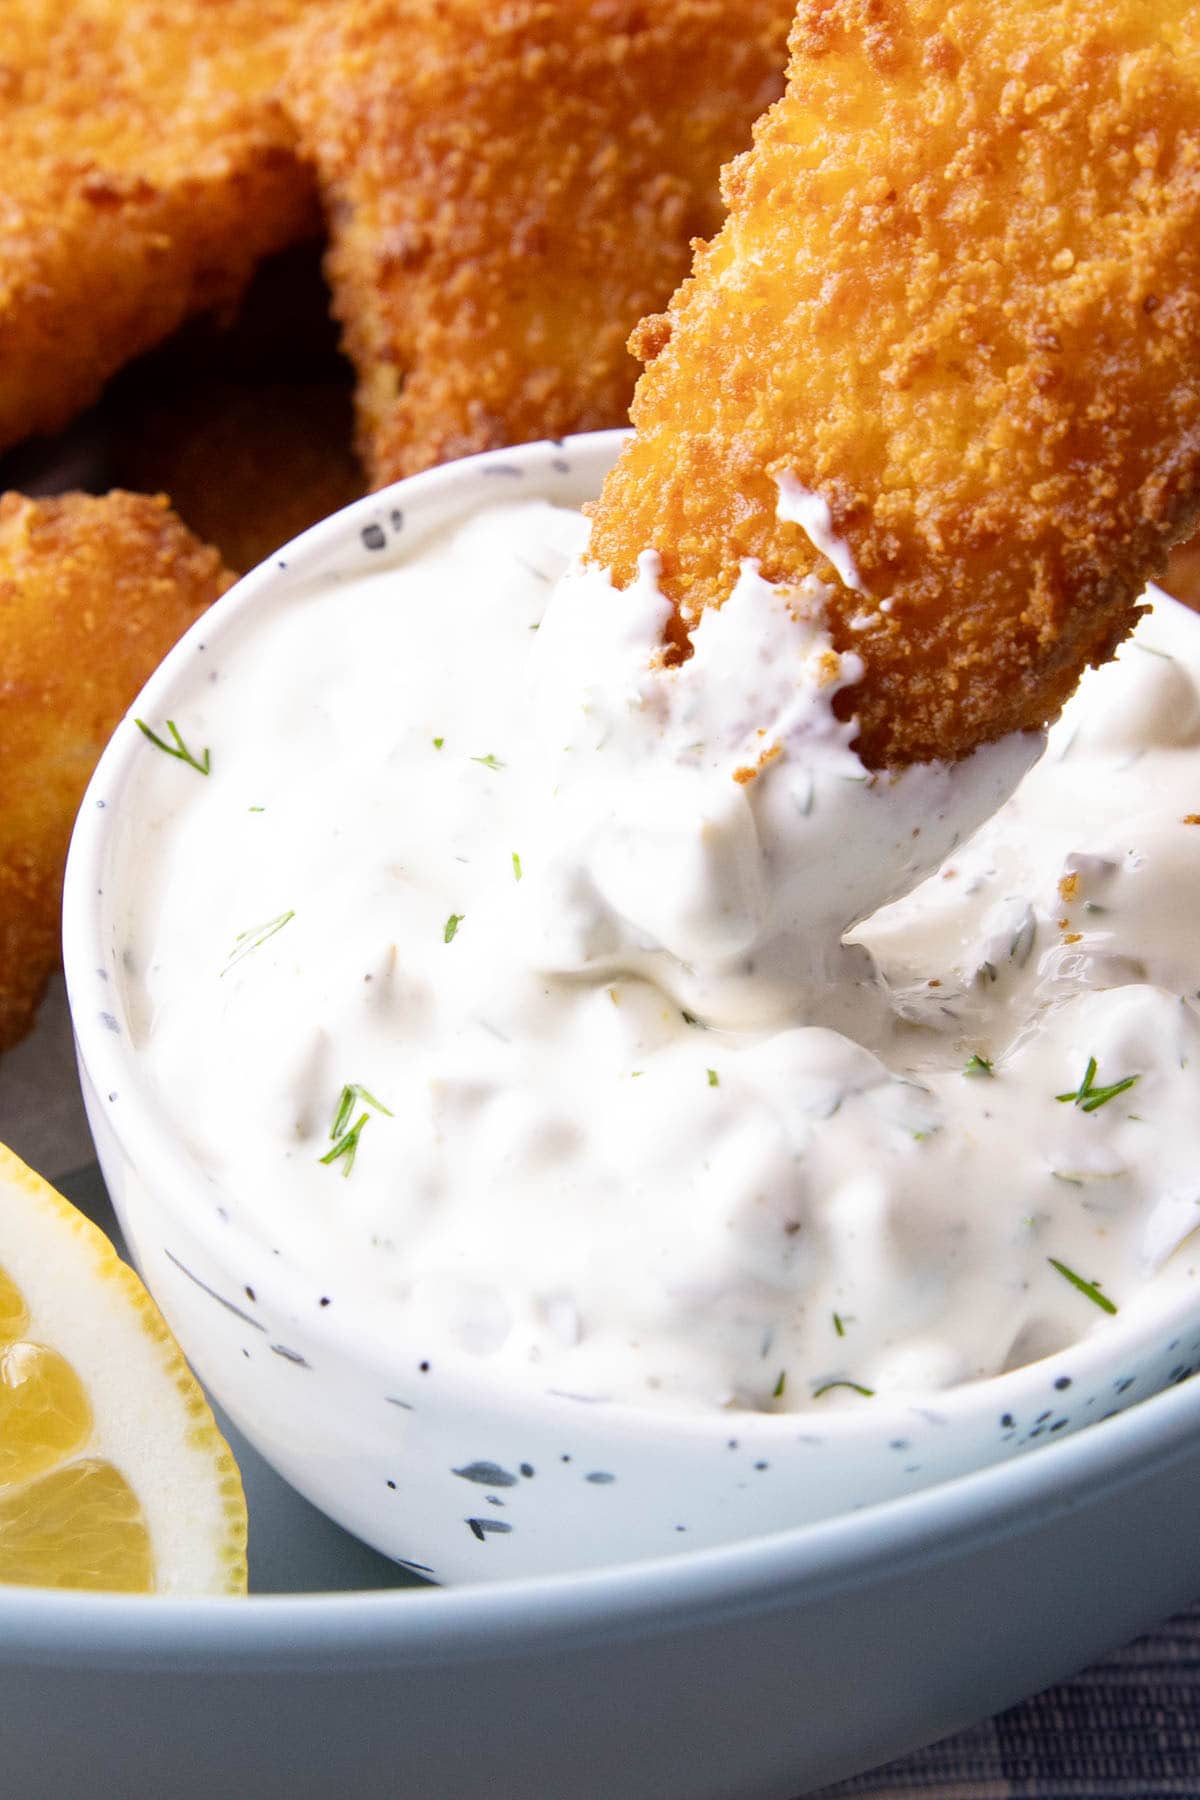 Eating this homemade dipping recipe easy with fried seafood and a lemon wedge.